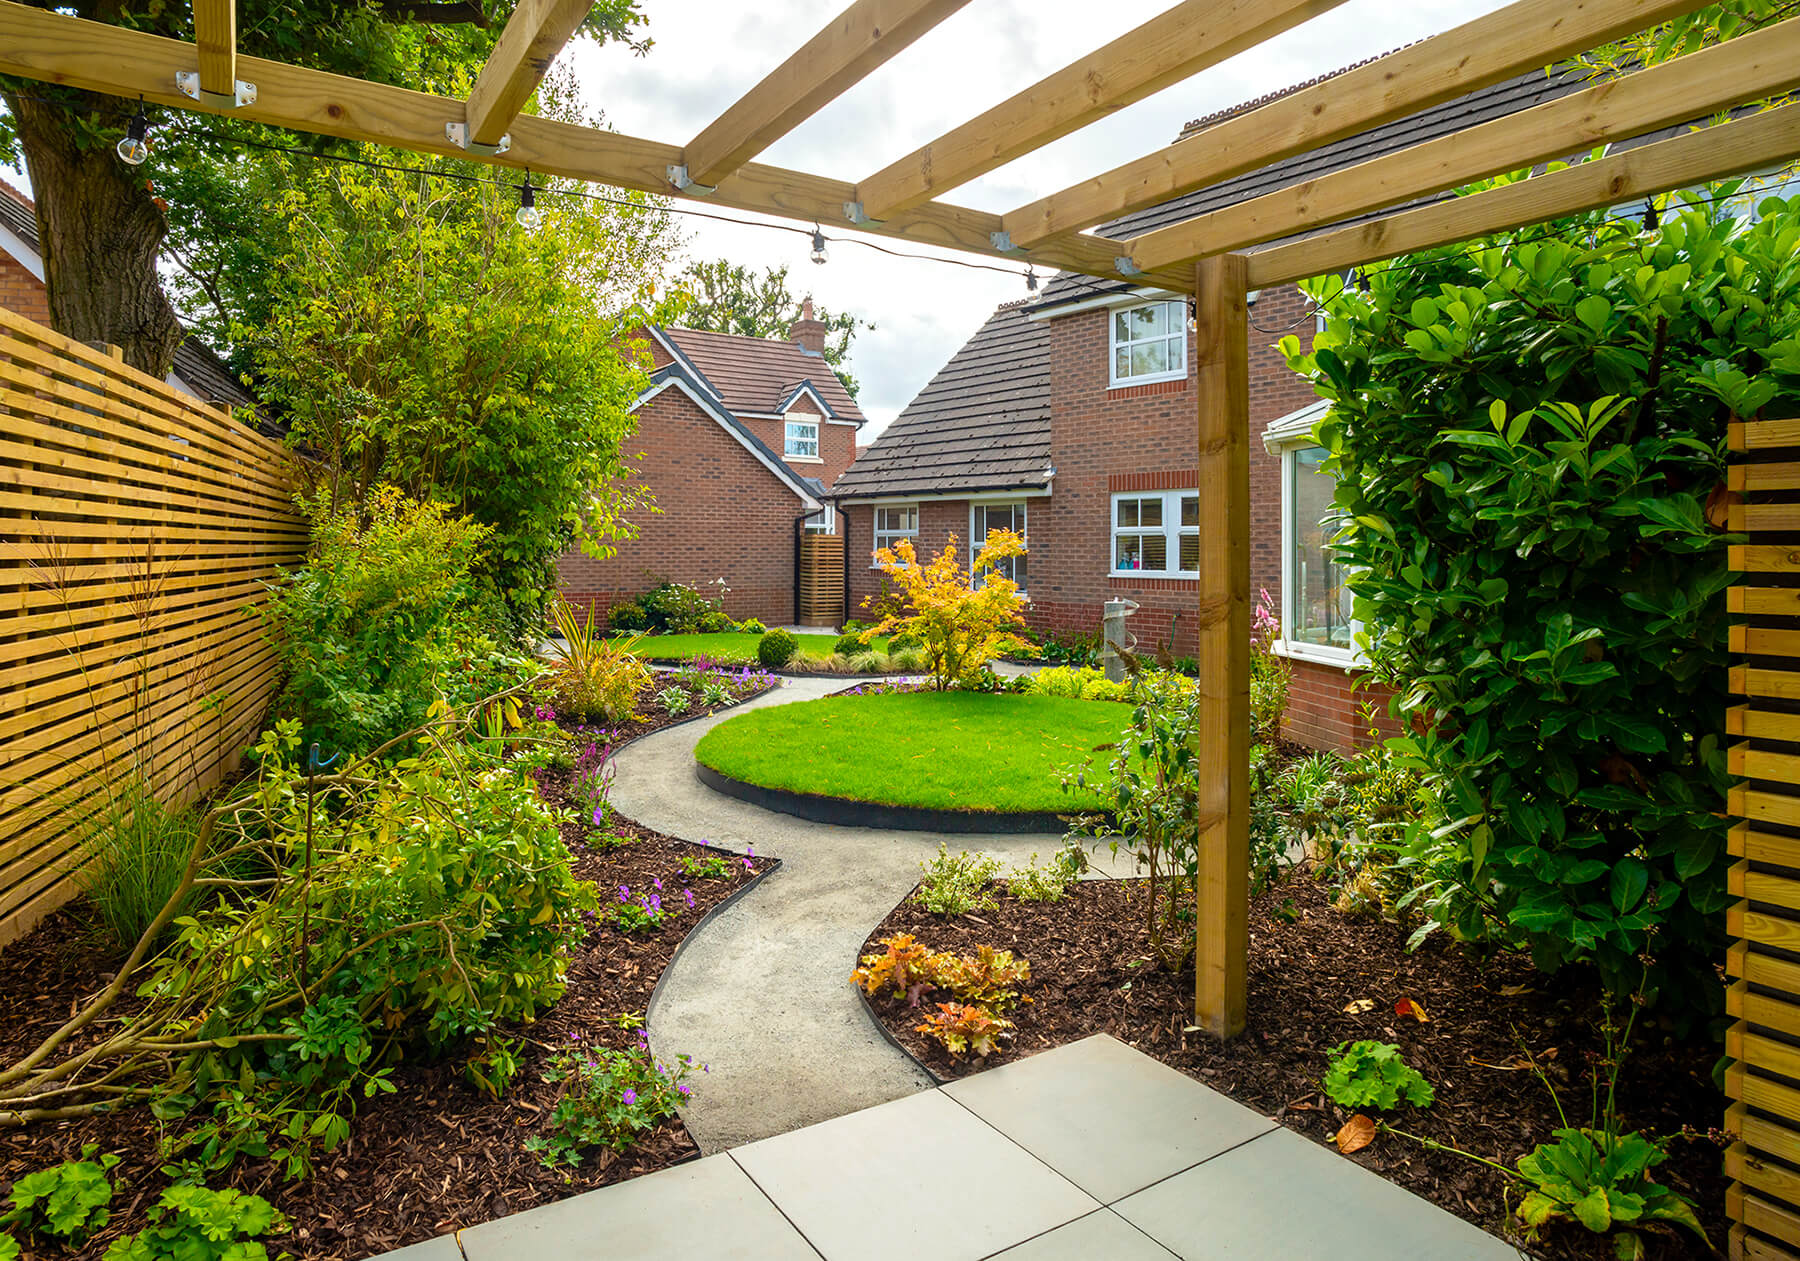 Garden Design with Patio Area and Water Feature with Planting Scheme